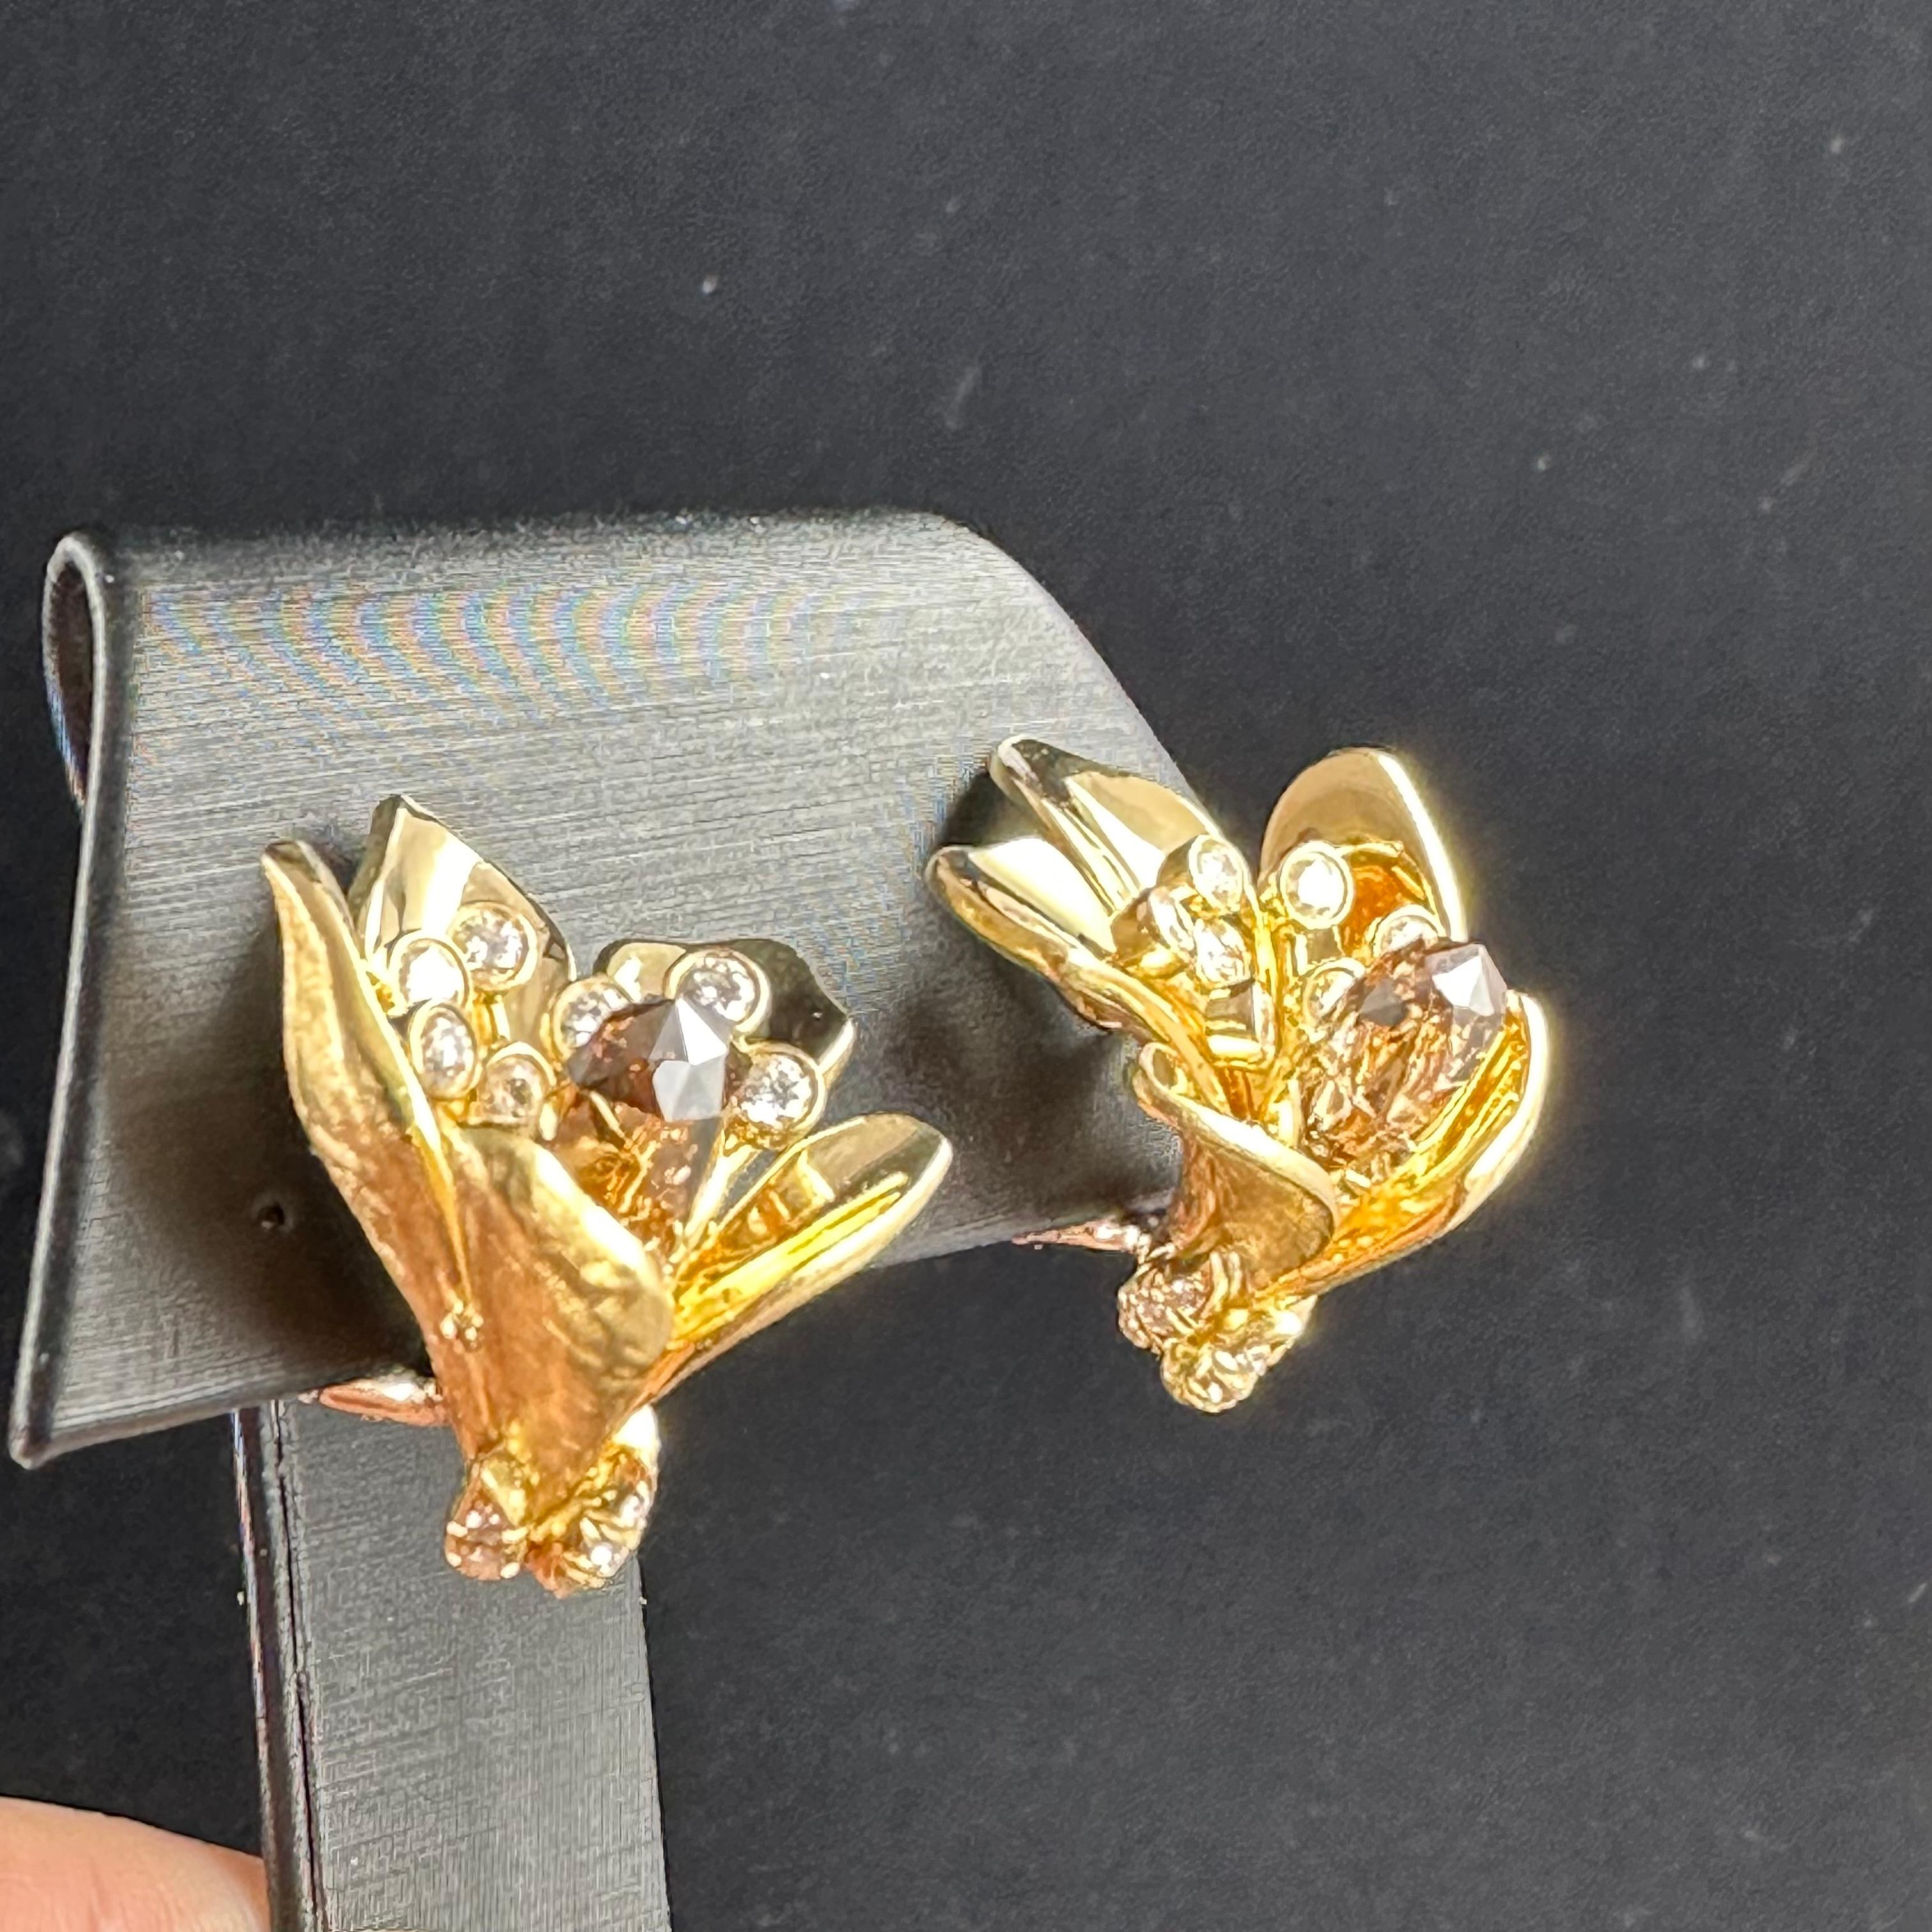 Julius Cohen Briolette Diamond 18k Yellow Gold Earrings In Excellent Condition For Sale In Beverly Hills, CA